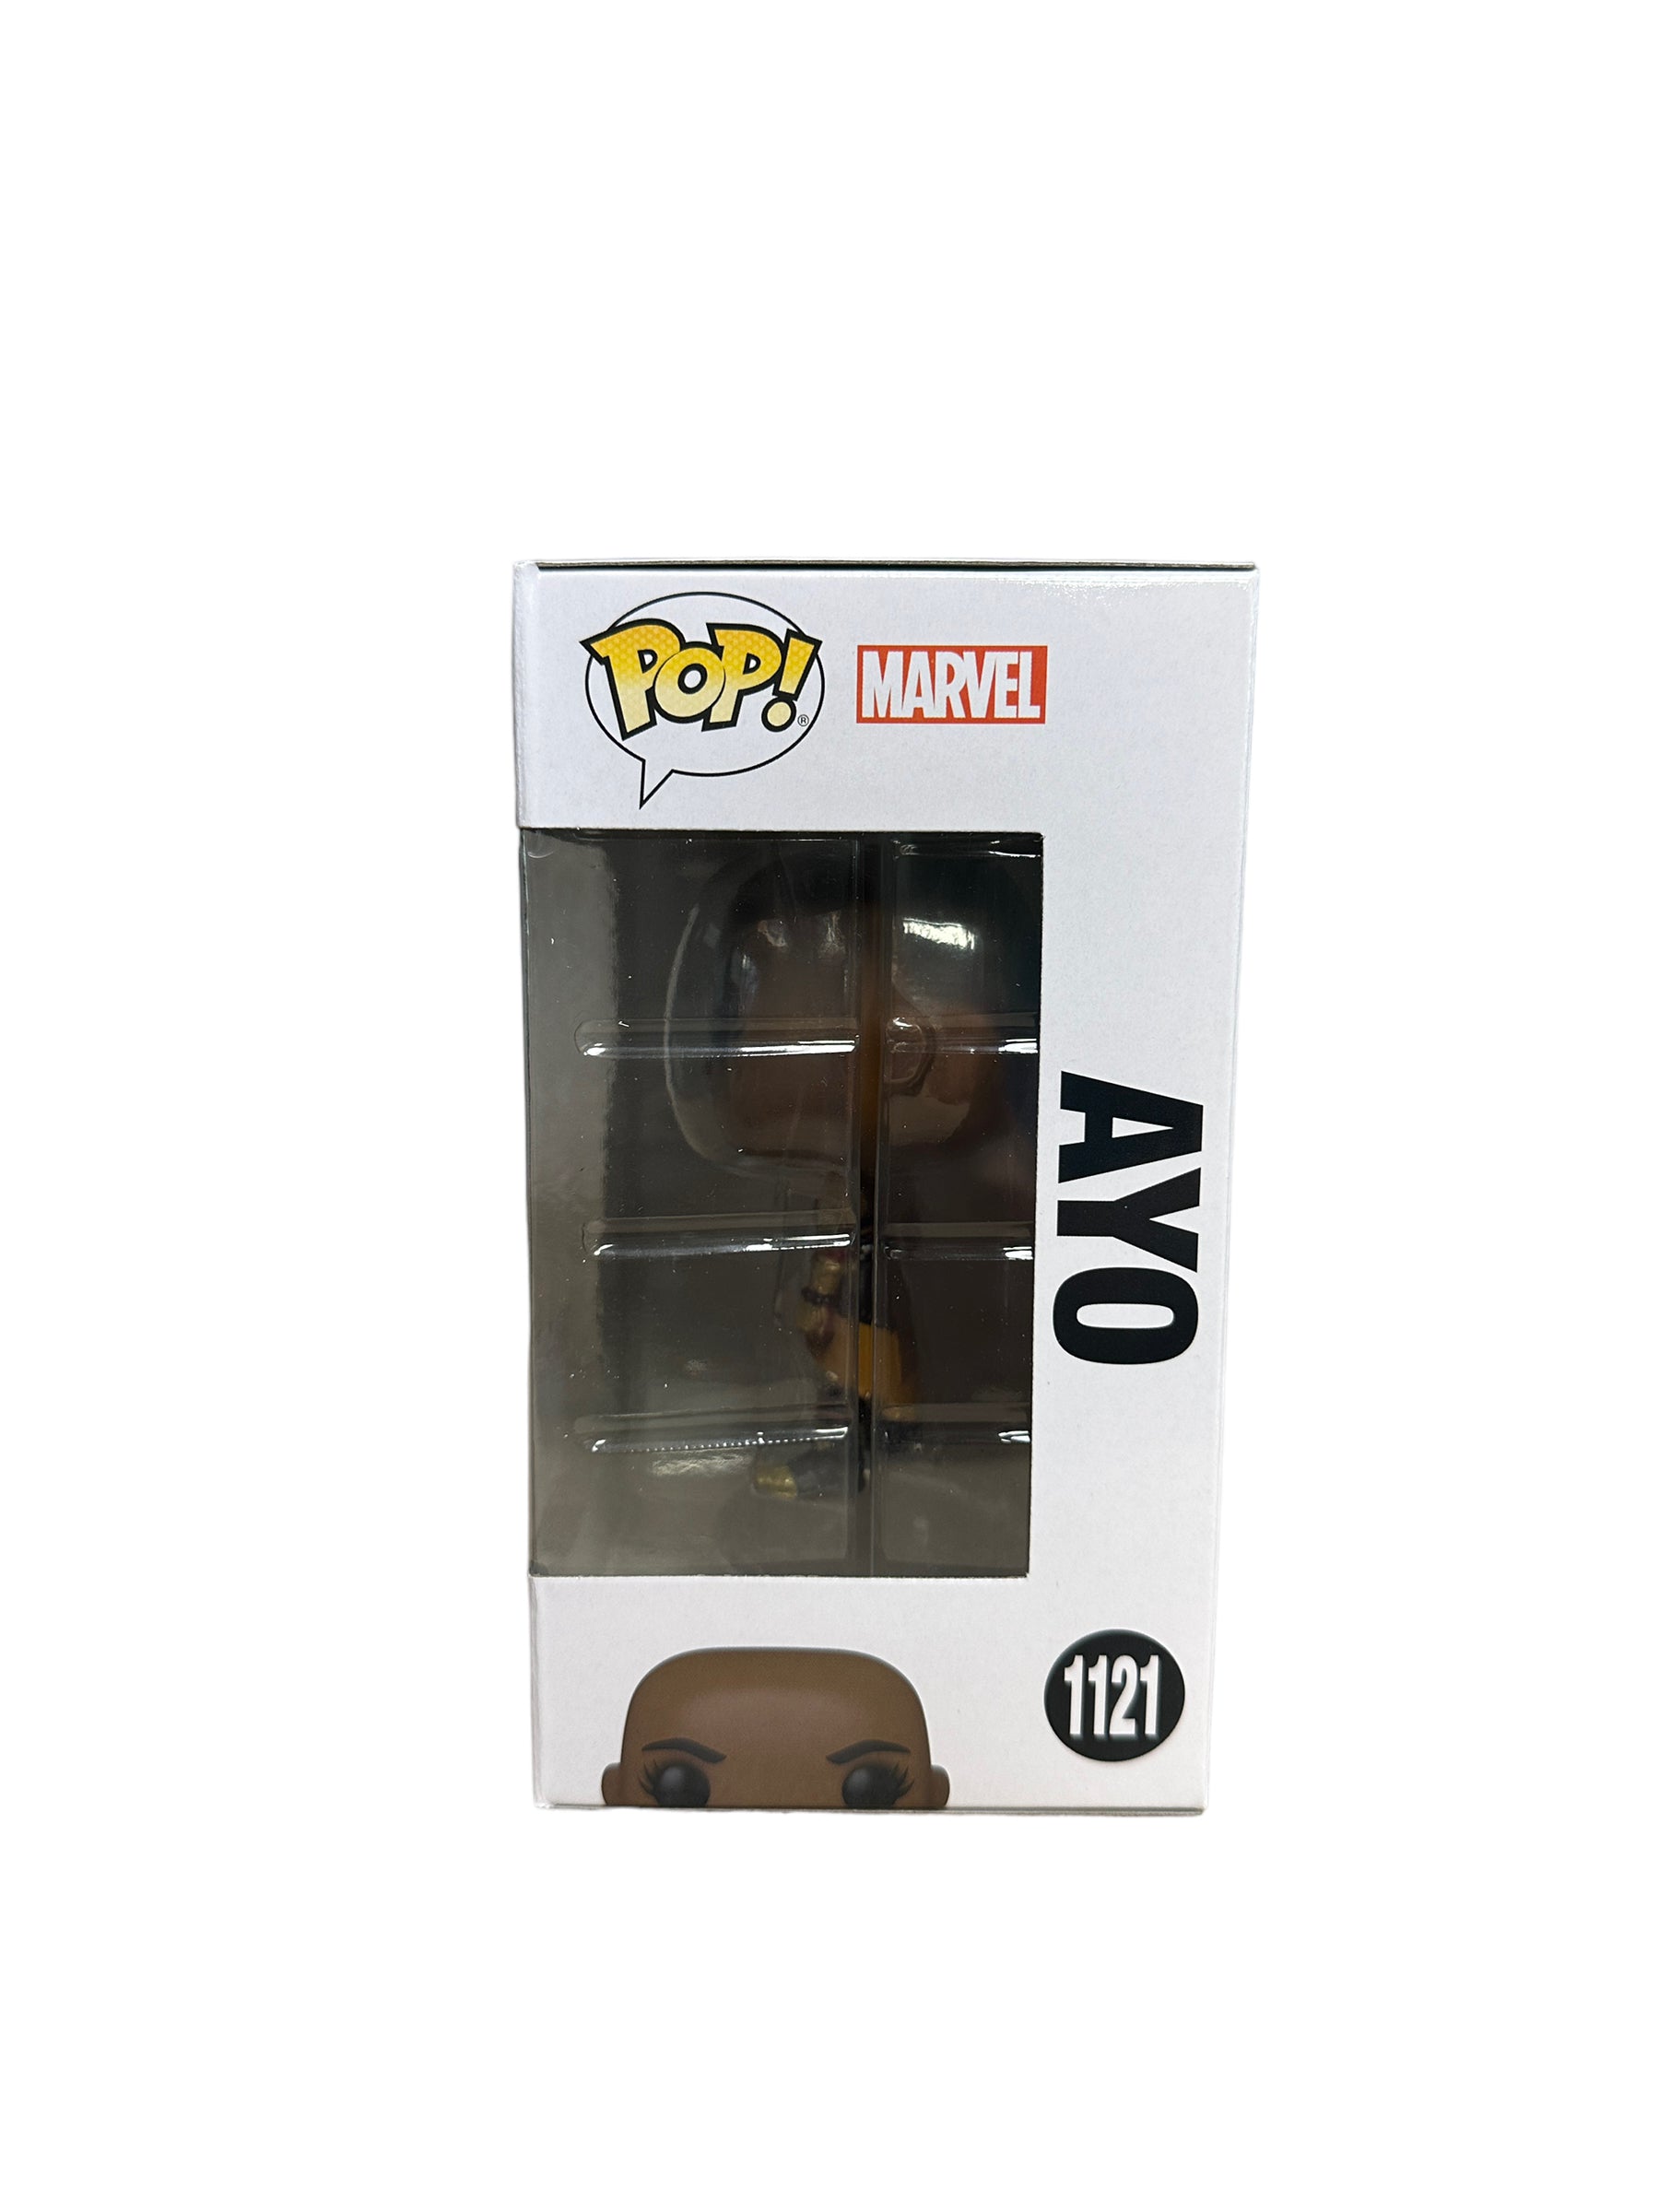 Ayo #1121 Funko Pop! - Black Panther Wakanda Forever - Marvel Collector Corps Exclusive - Condition 8.75/10